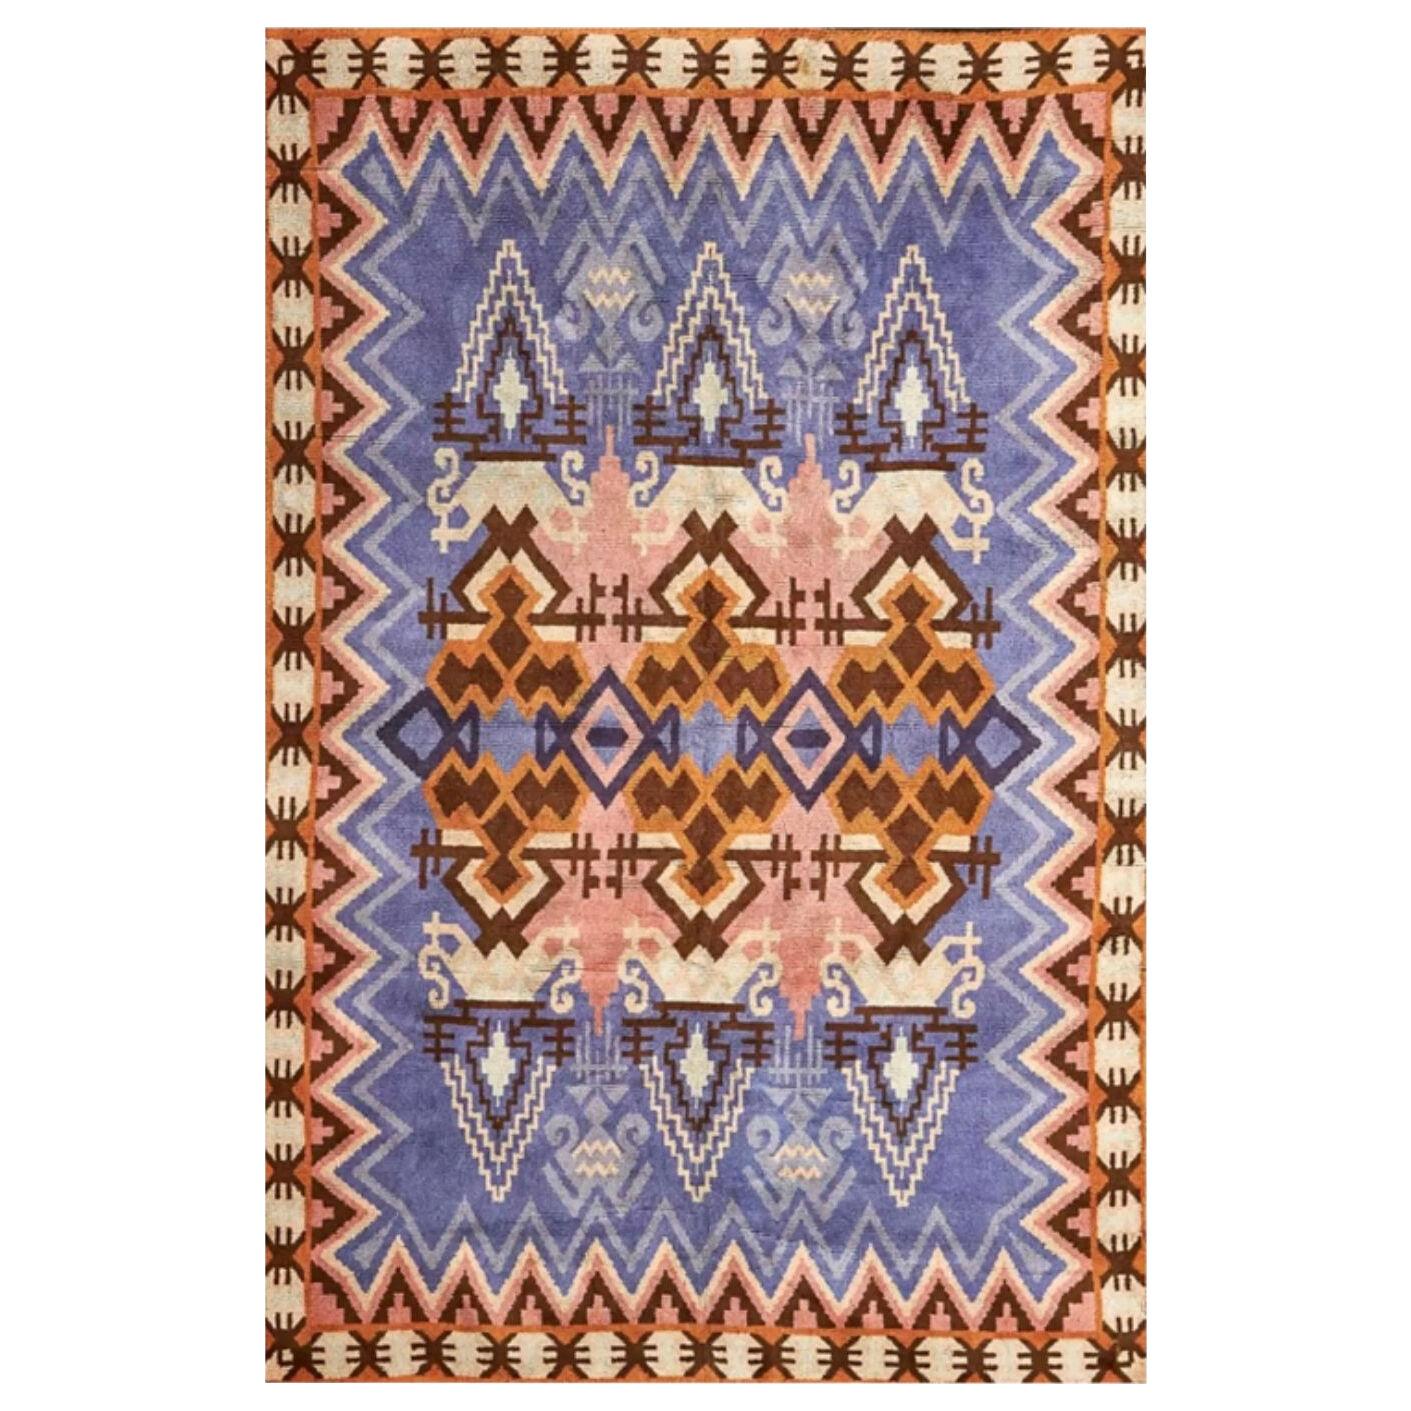 Impi Sotavalta Finnish Hand-Woven Lavender and Marigold Geometric Ray Rug, 1920s